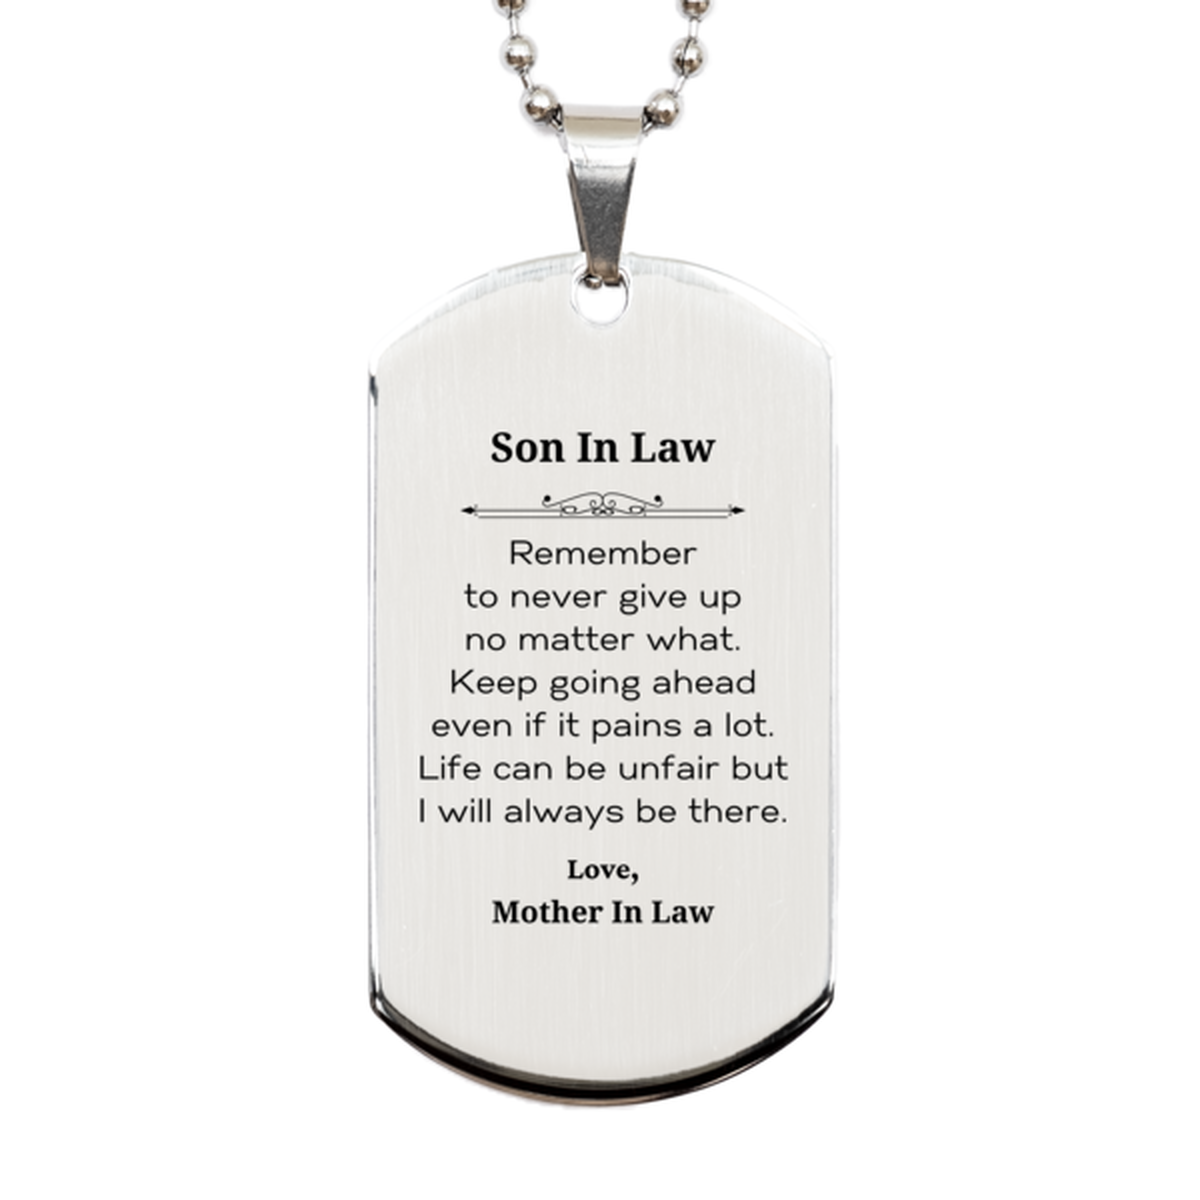 Son In Law Motivational Gifts from Mother In Law, Remember to never give up no matter what, Inspirational Birthday Silver Dog Tag for Son In Law